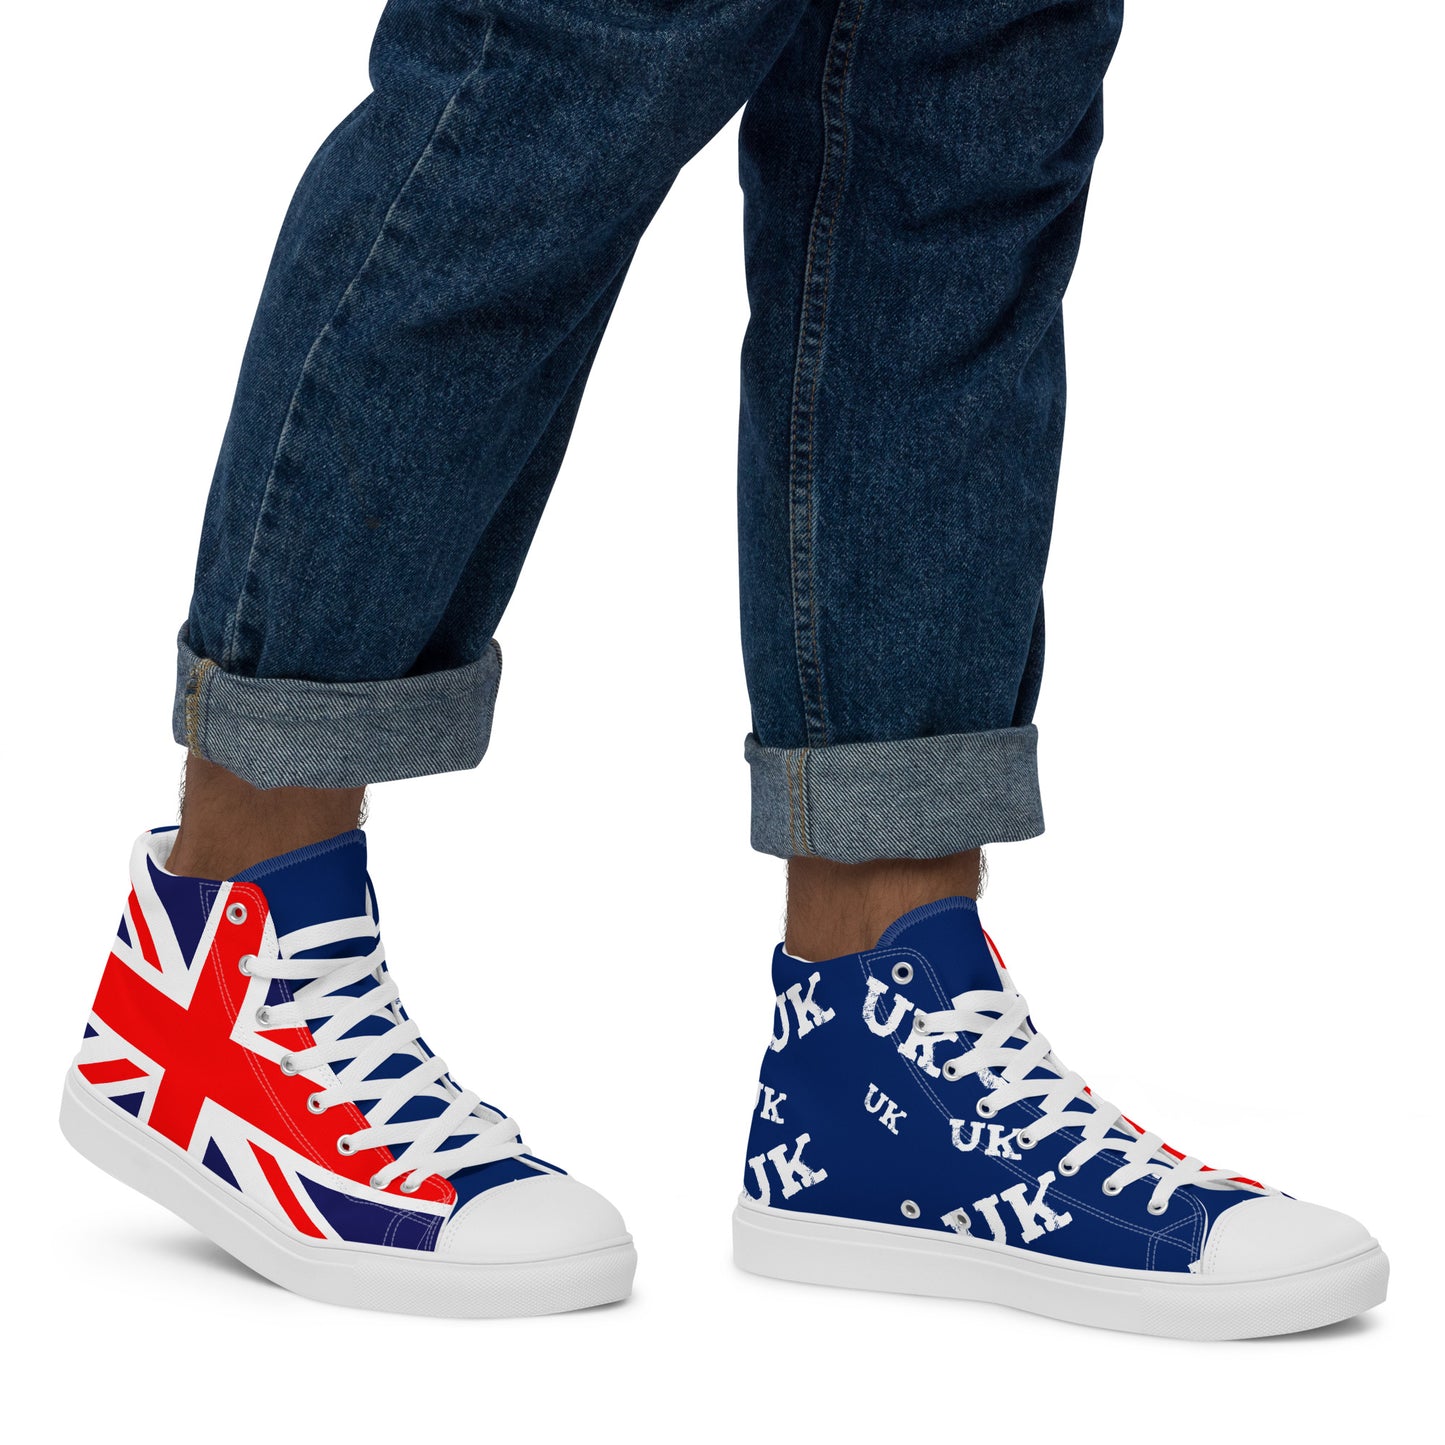 Canvas Sneakers For Men With UK Print